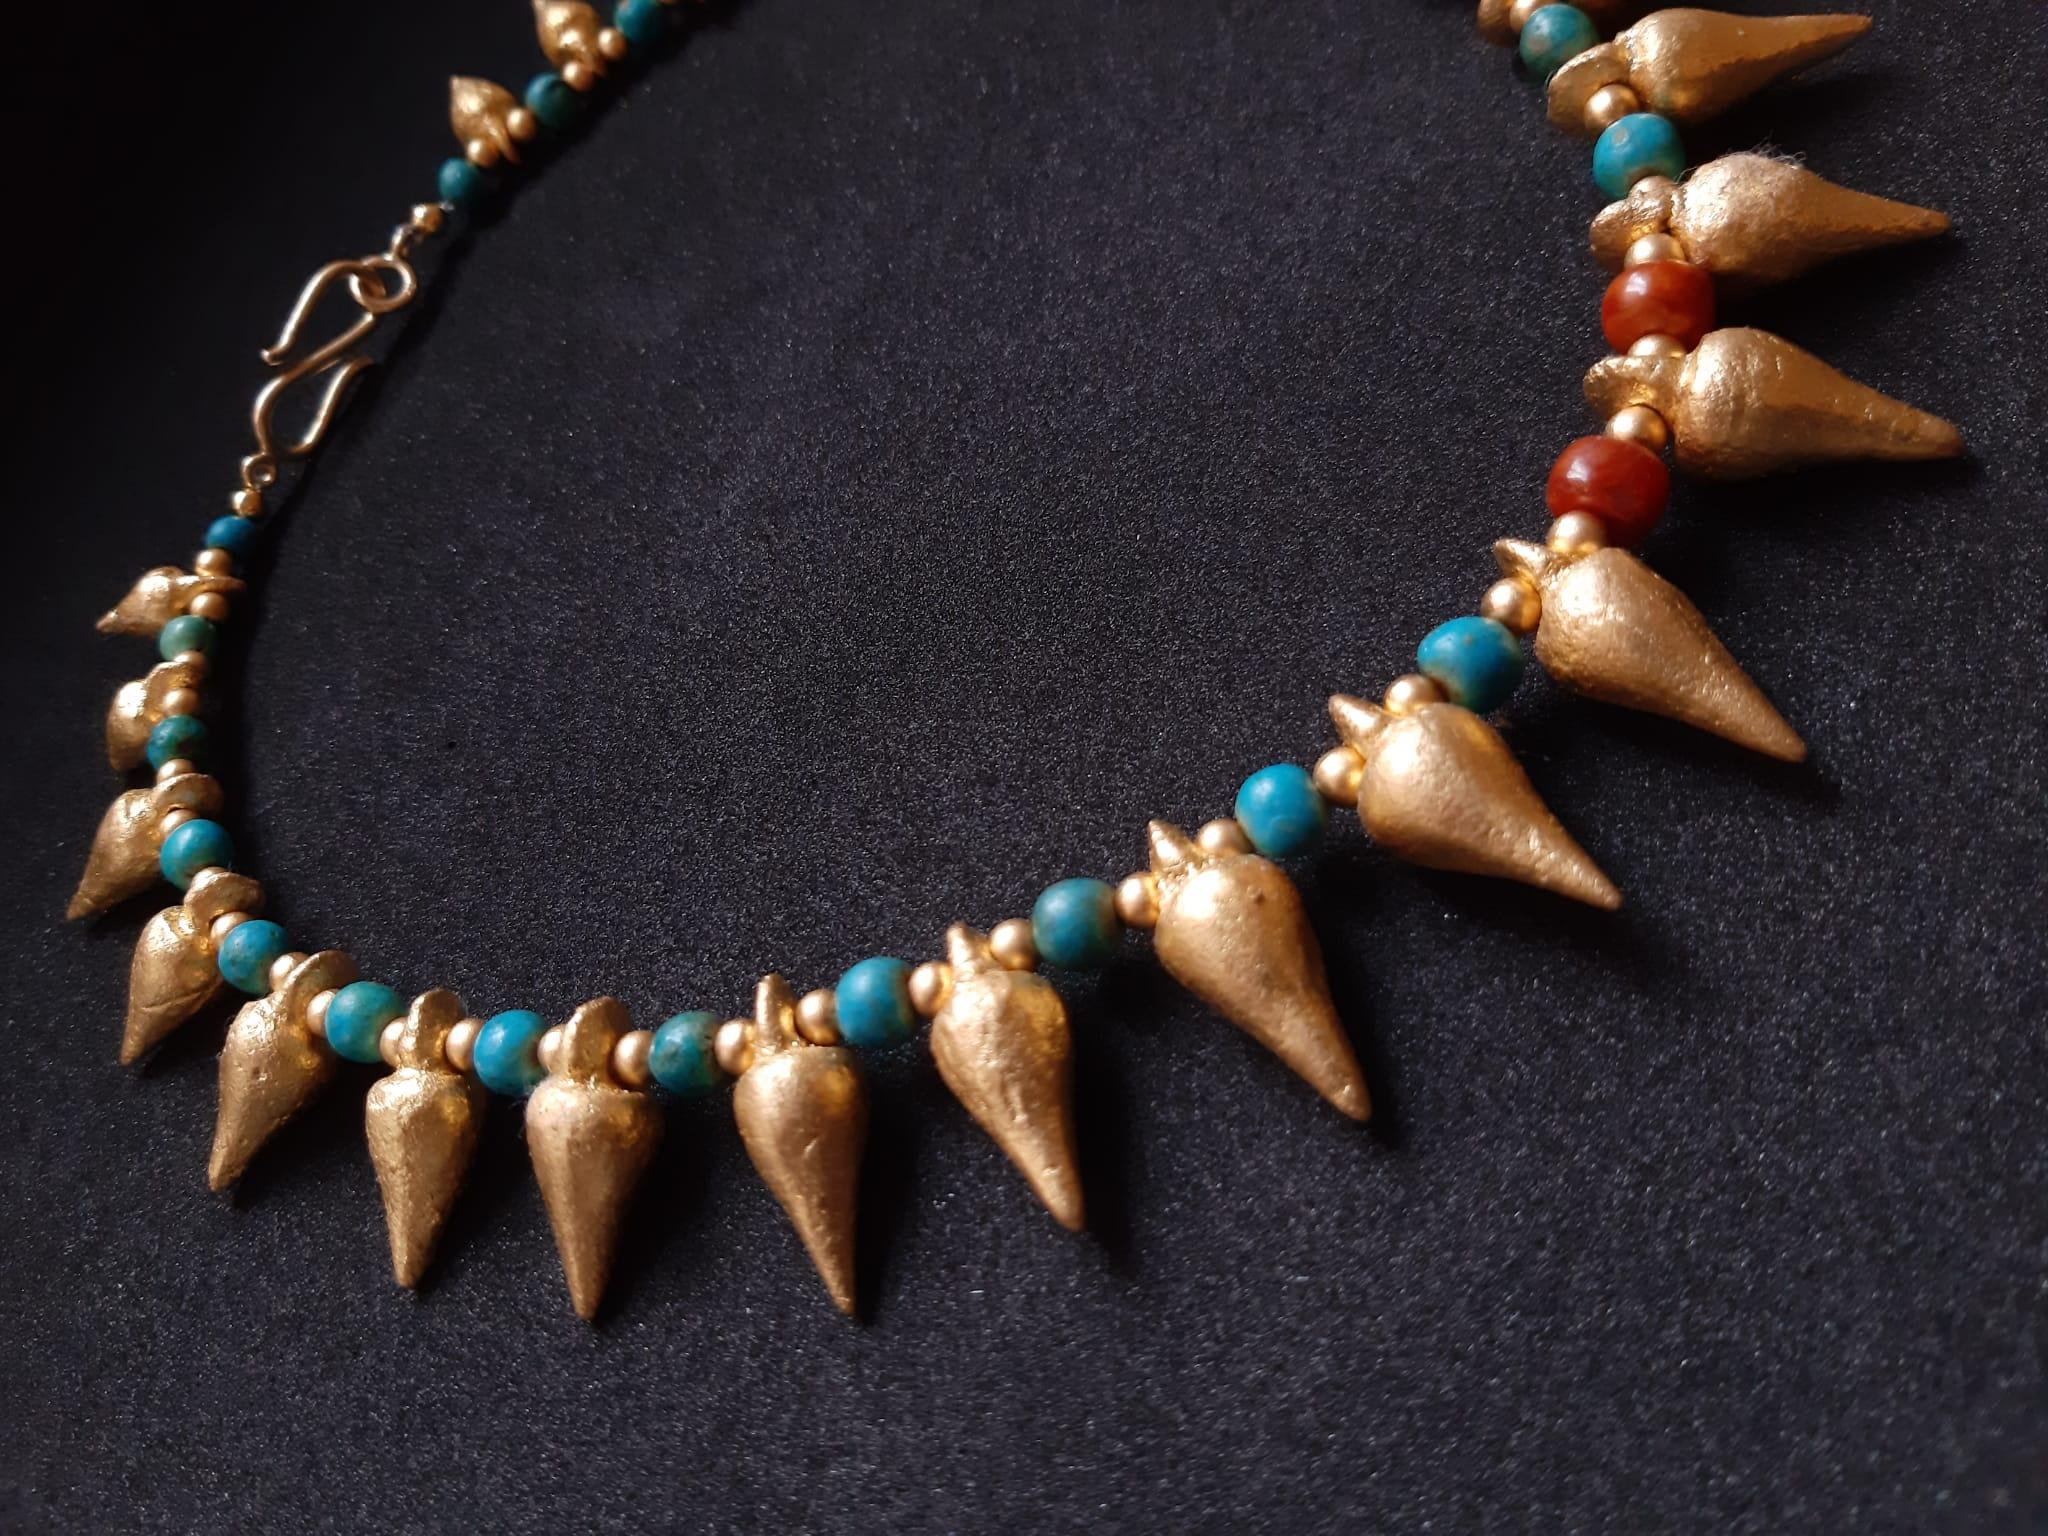 Stunning restrained necklace consisting of 25 Greek early Hellenistic gilt terracotta Amphora shaped pendants and 26 ancient Egyptian stone beads in between (24 turquoise and 2 carnelian), complemented by tiny gilt metallic beadlets. Golden S-form